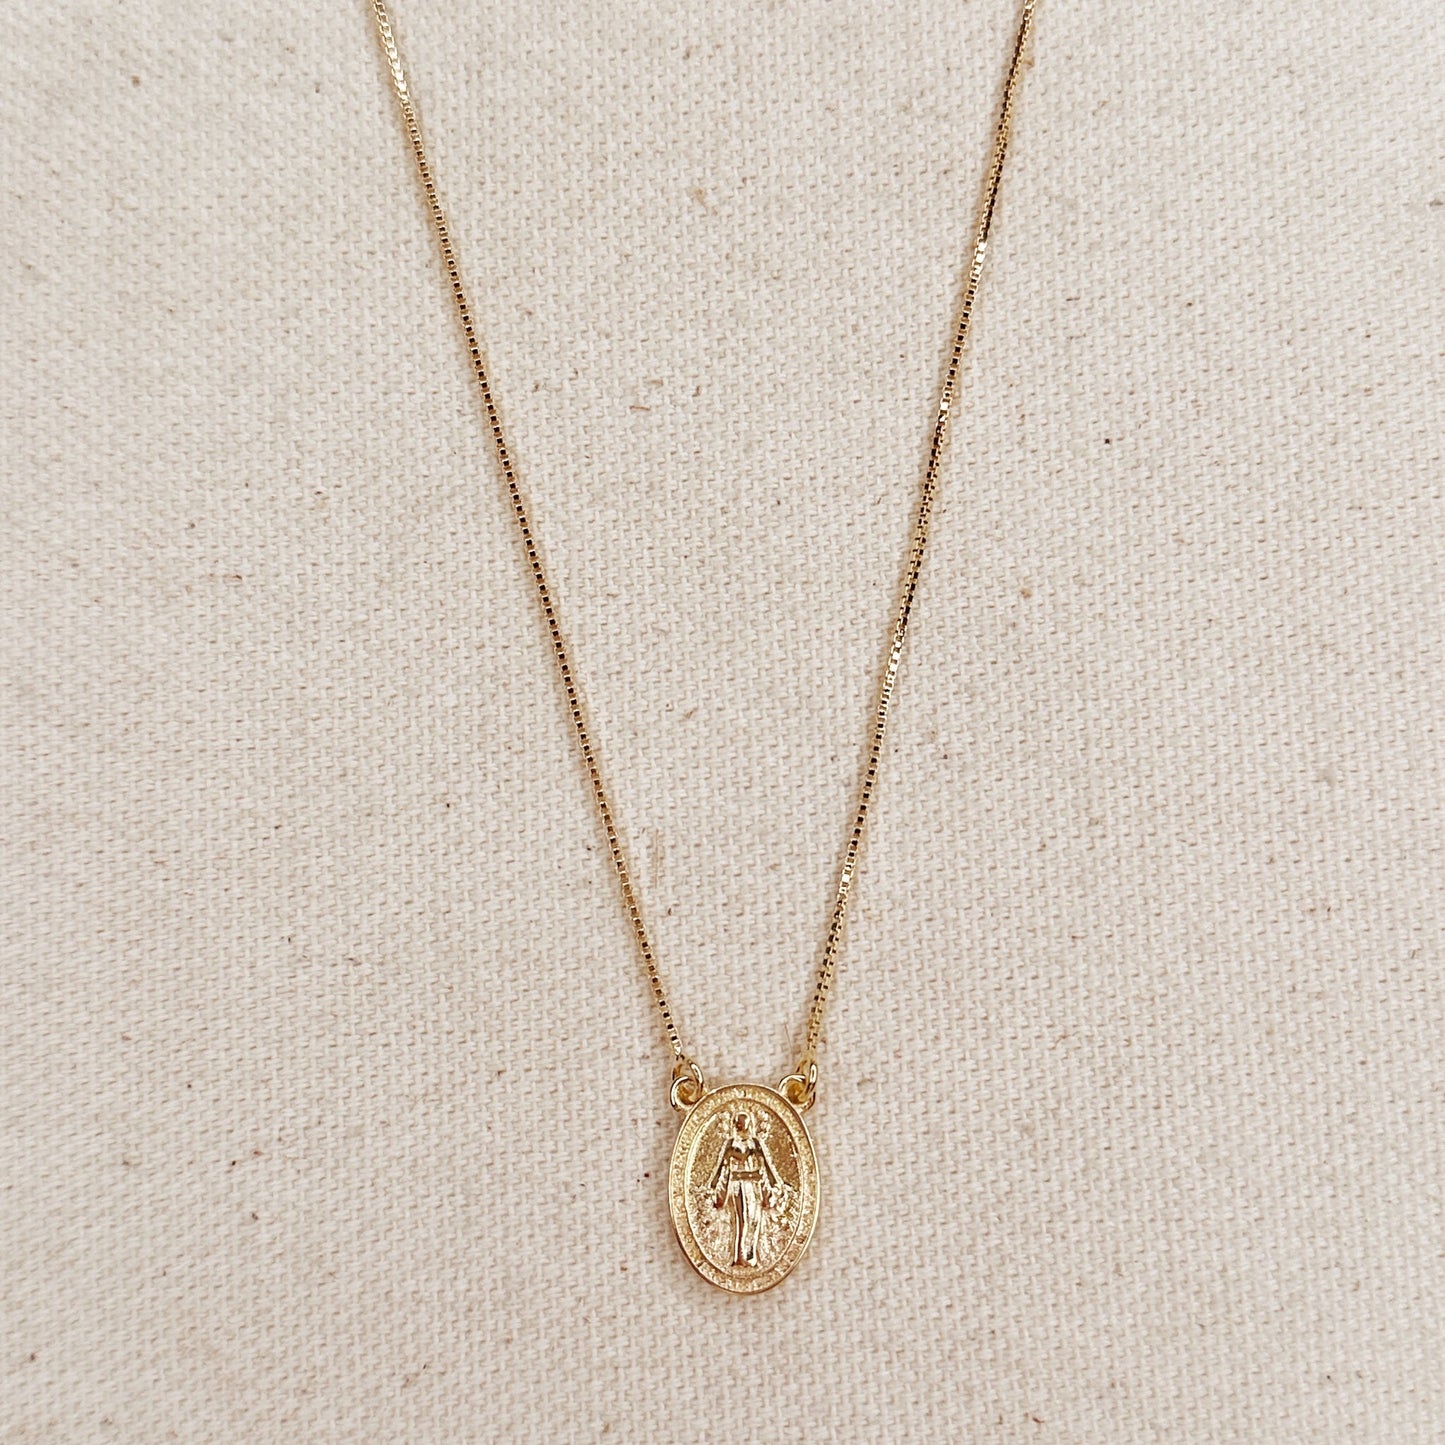 Miraculous Medal x Our Lady of Sorrow Gold Filled Dainty Chain Necklace